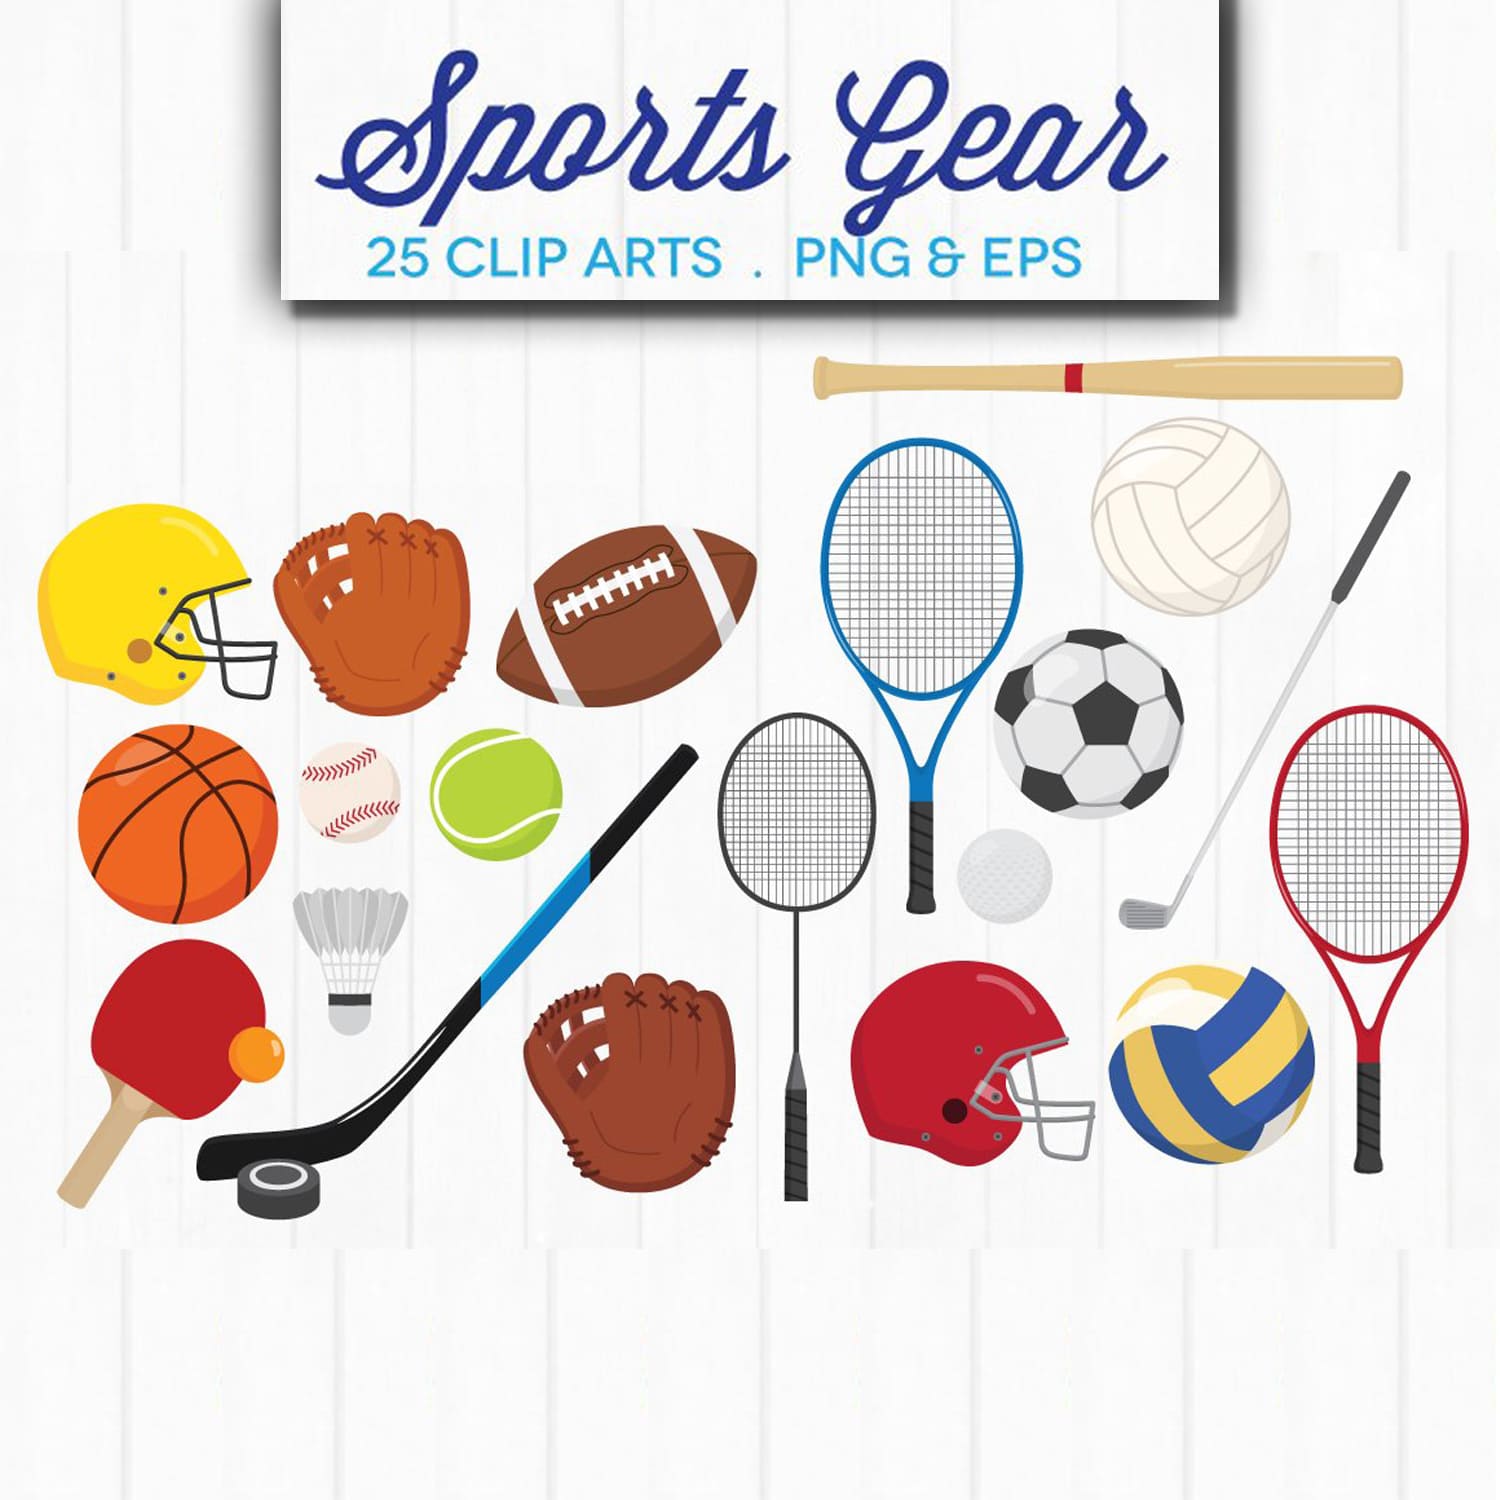 Sports Gear Clip Art - main image preview.